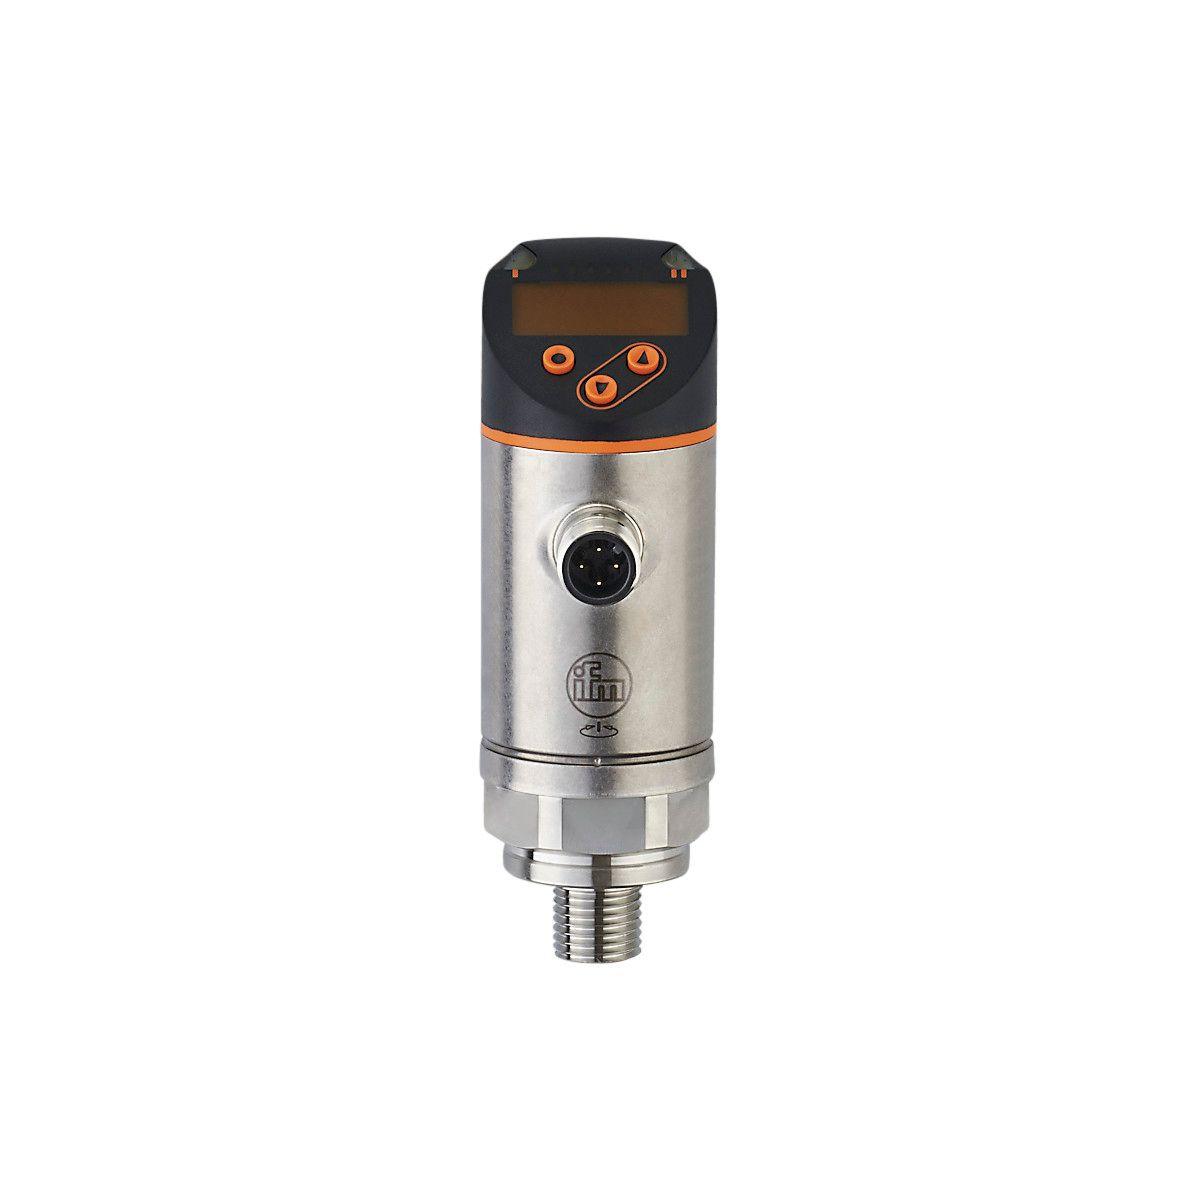 ifm Electronic PN2670 Pressure sensor with display, Two switching outputs, one of them programmable as IO-Link and one as analog output, Output signal: switching signal; analog signal; IO-Link; (configurable), Measuring range: 0...400 bar 0...5800 psi 0...40 MPa, Process conne